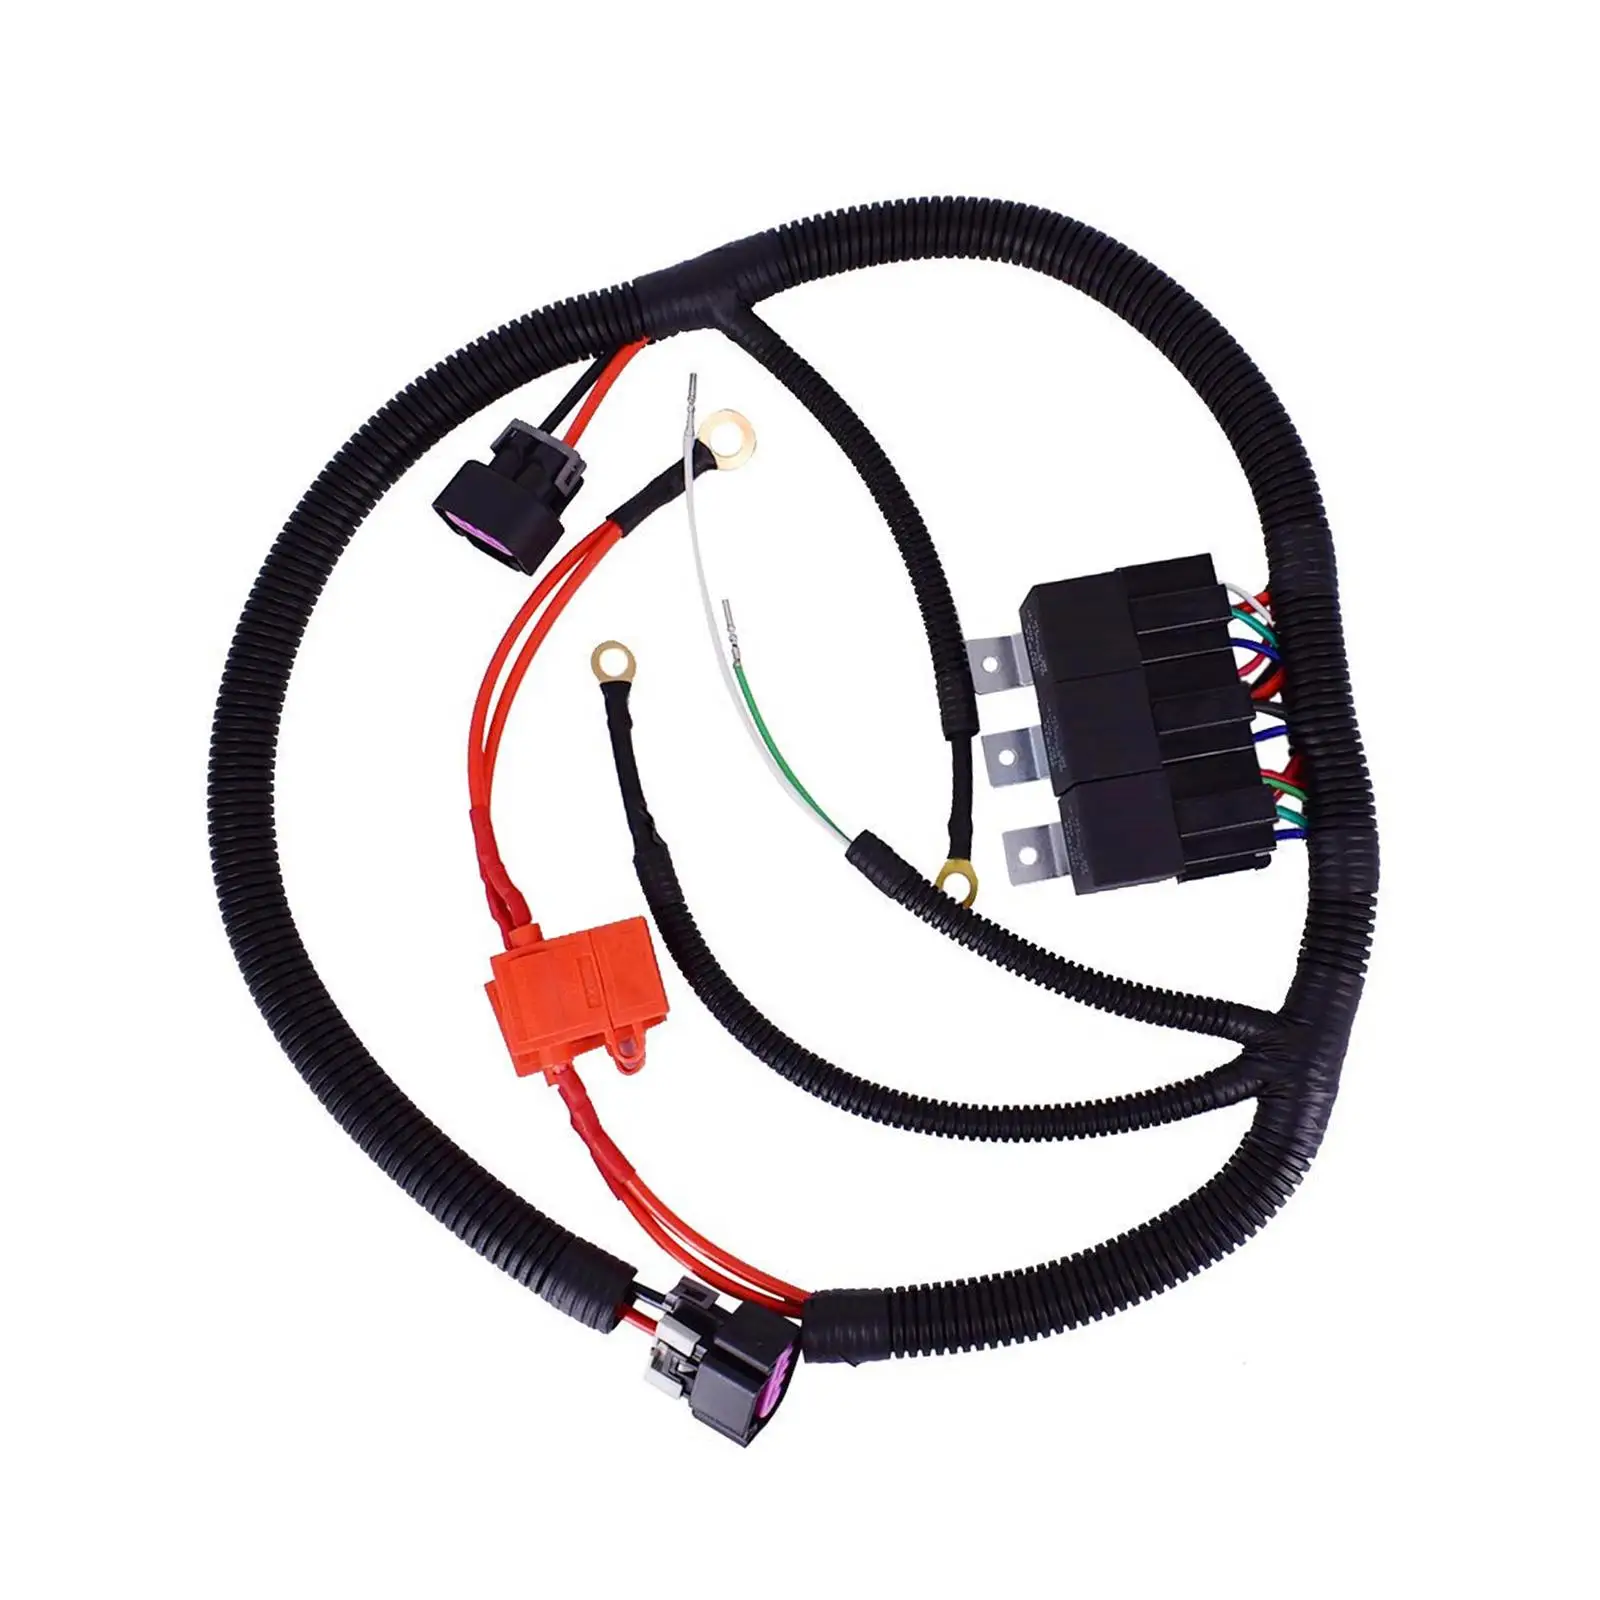 Dual Electric Fan Upgrade Wiring Harness 7L5533A226T High Quality Replacement for GM Tahoe ECU Control Wiring Harness Tool